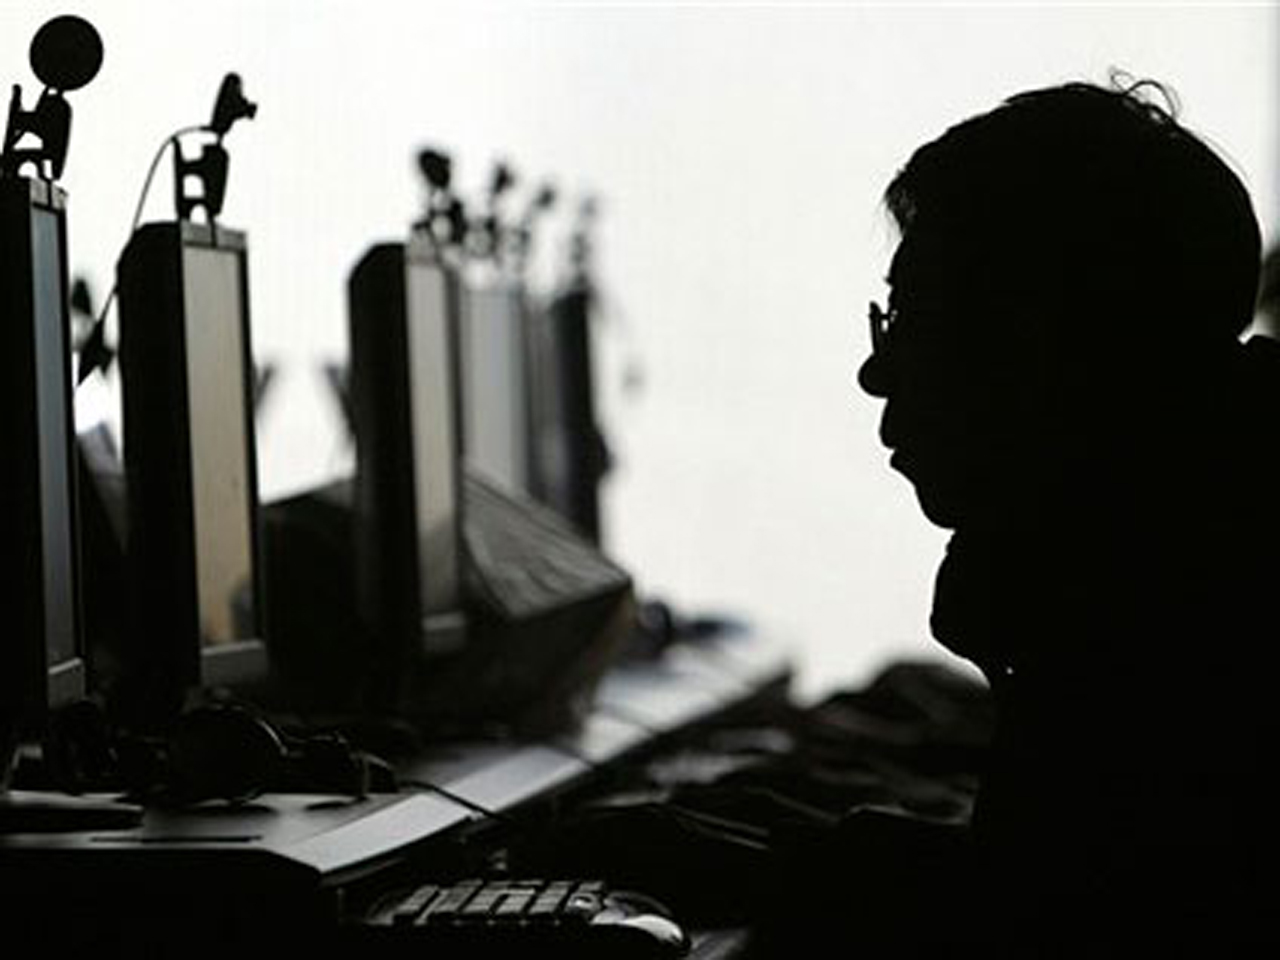 Watching porn may only have small effect on teen sexual behavior - CBS News